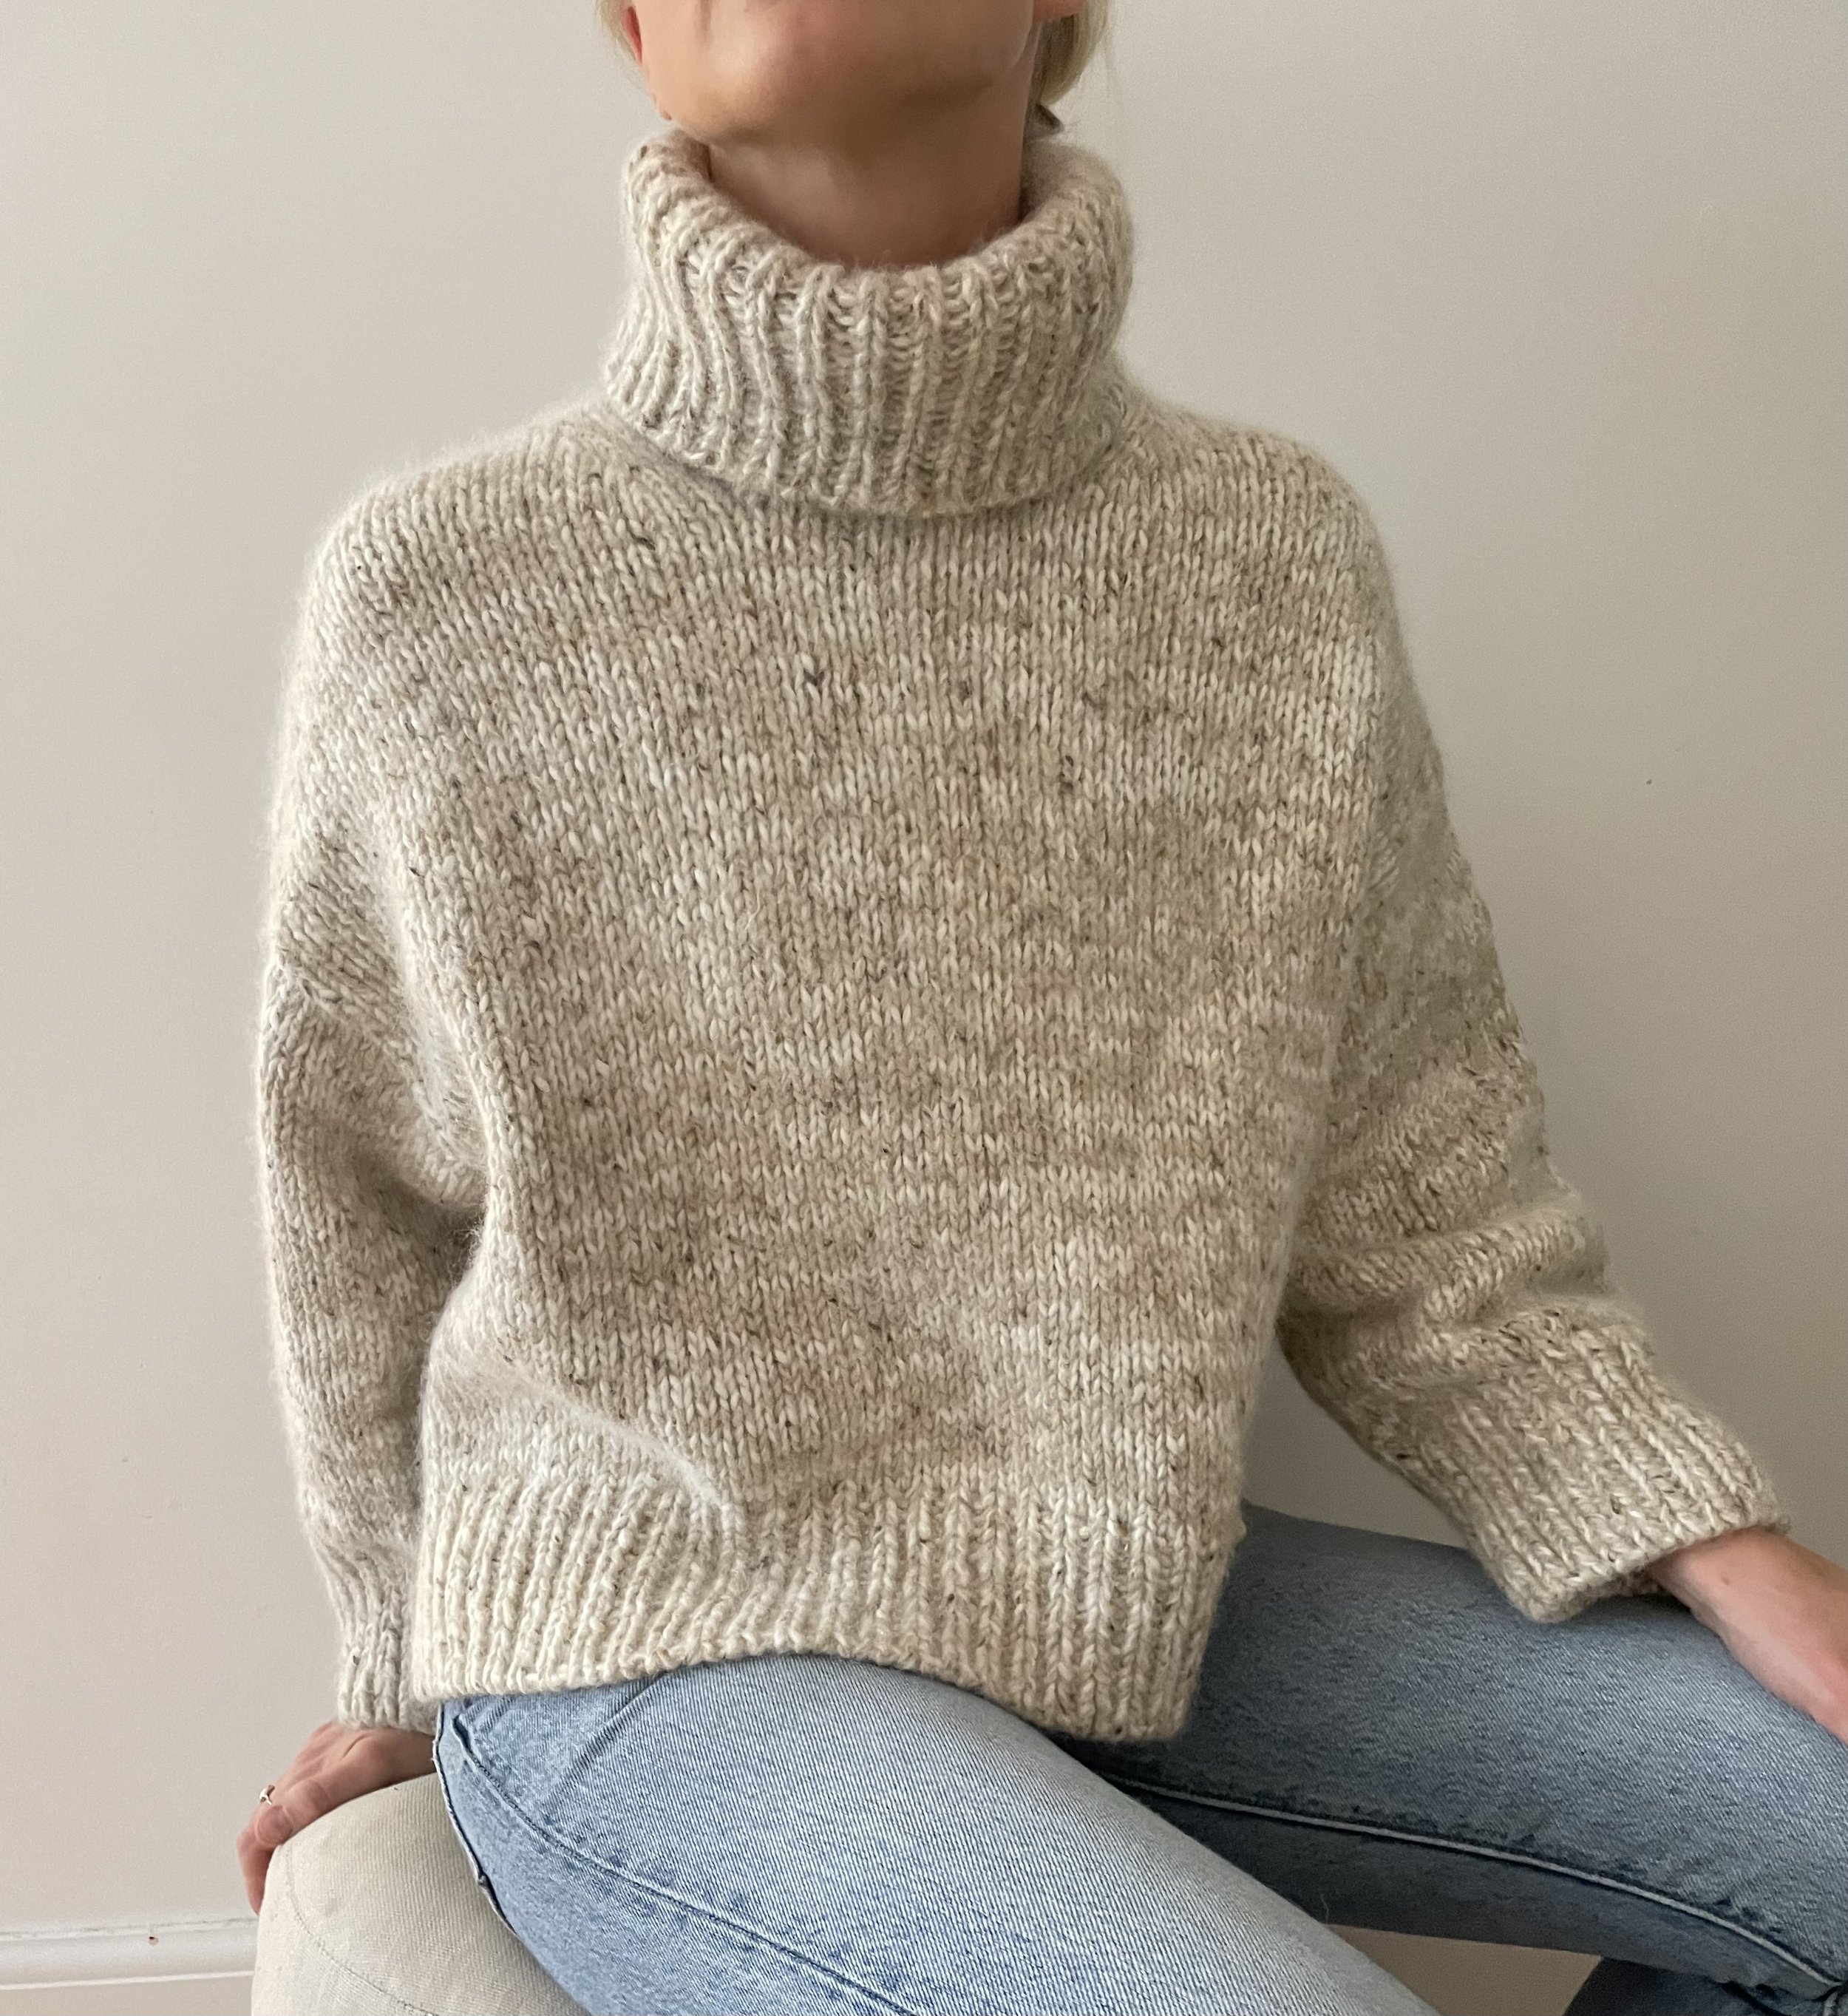 PATTERNS — Coco Amour Knitwear